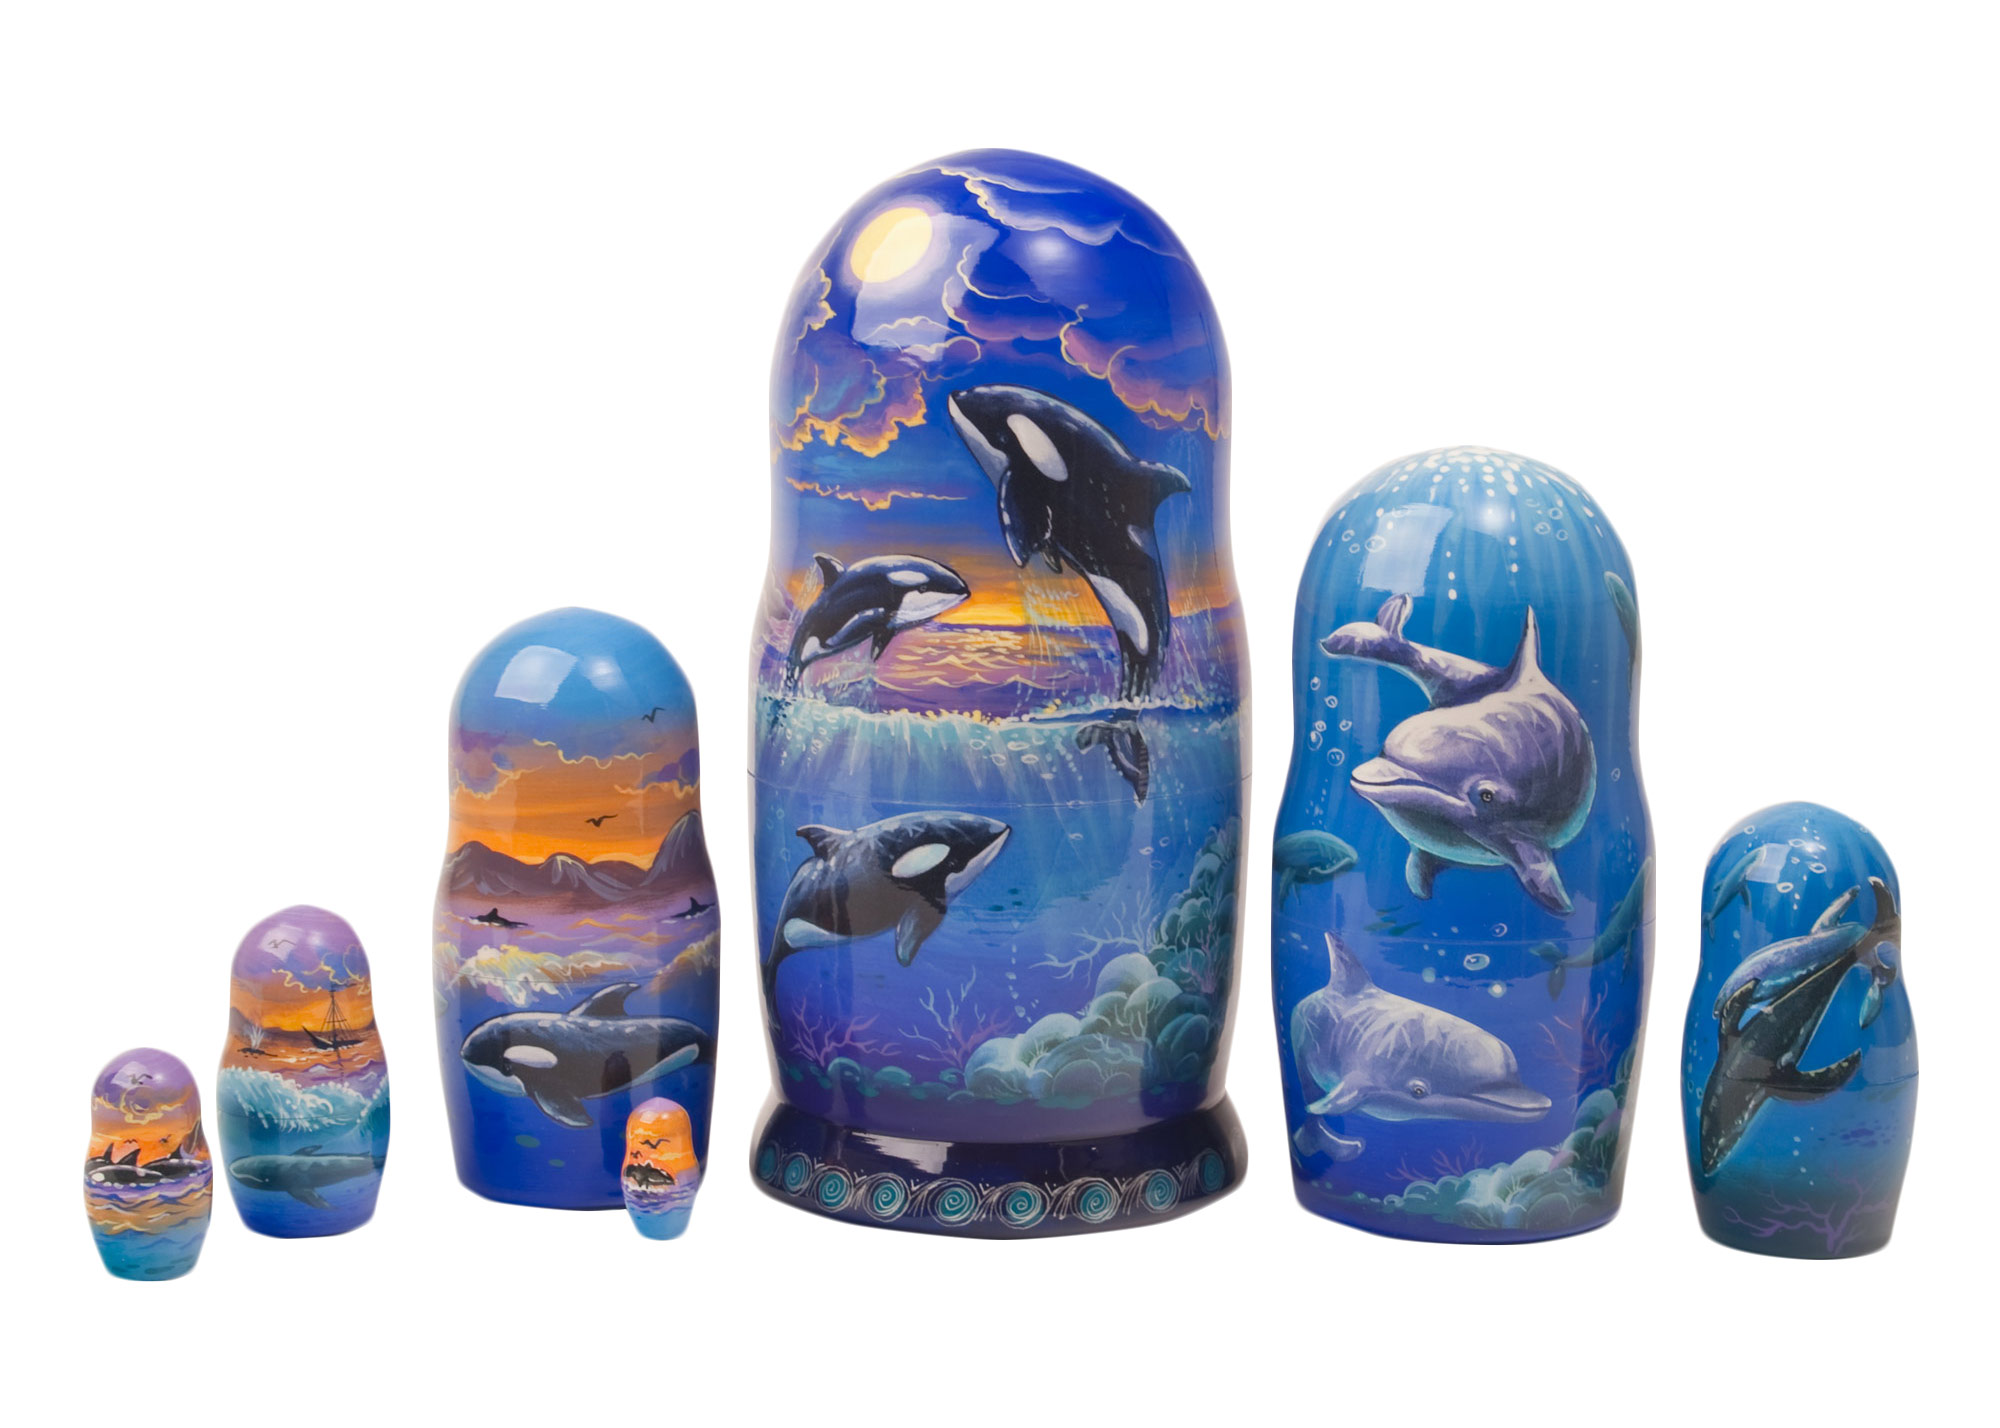 Buy Whale Watching Nesting Doll 7pc/8" at GoldenCockerel.com